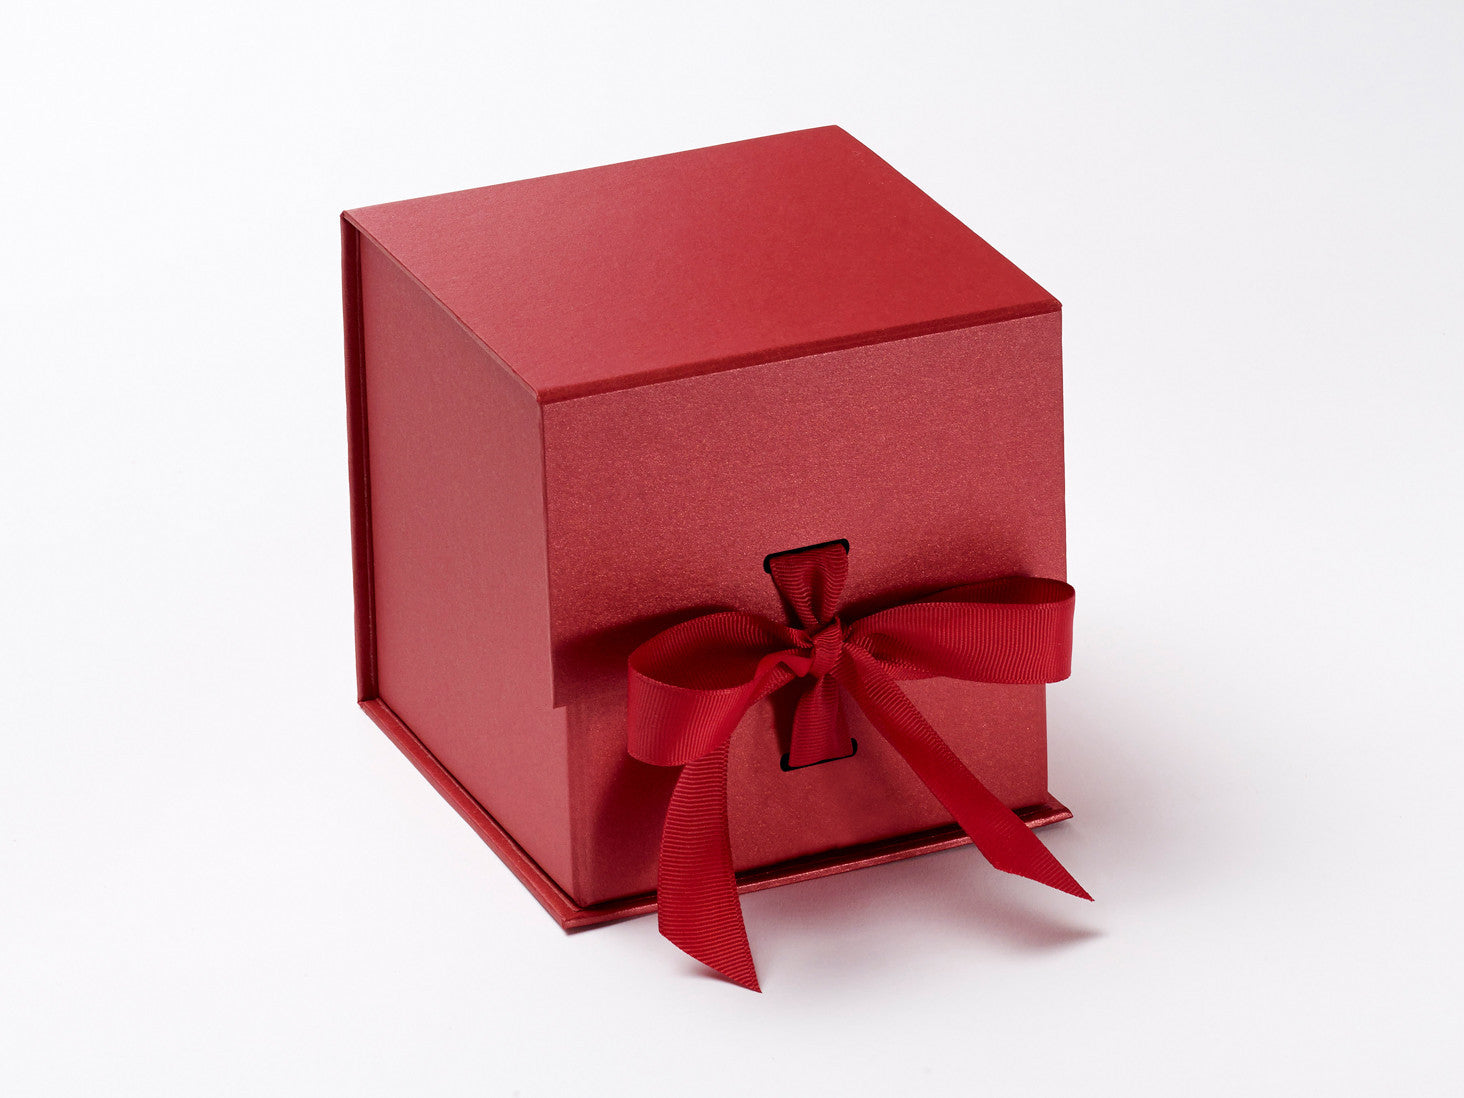 Sample Large Red 5" Cube Gift Box with Ribbon from Foldabox USA